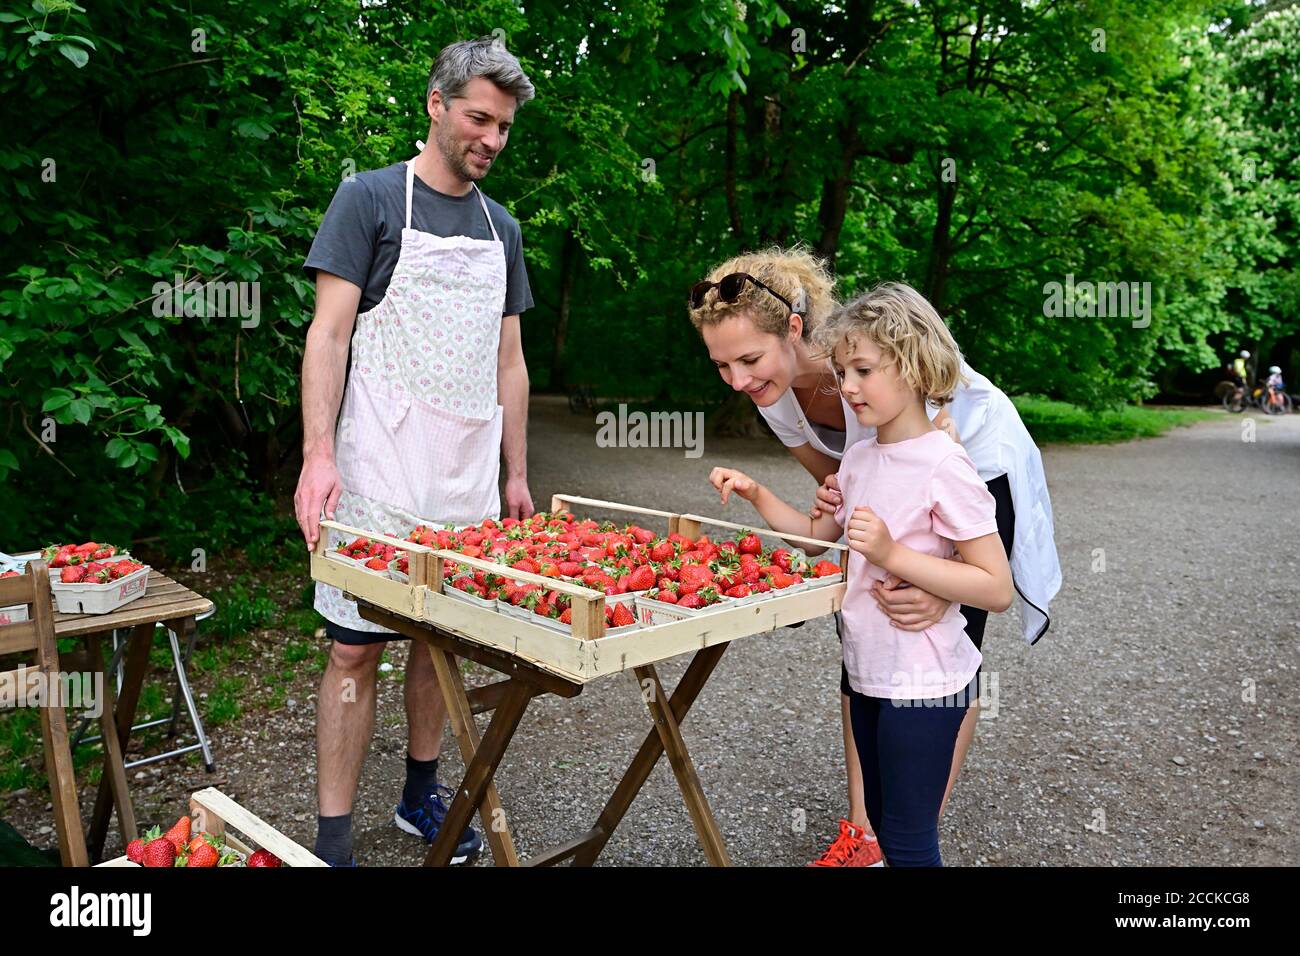 Male vendor looking at woman with daughter choosing strawberries at market stall Stock Photo